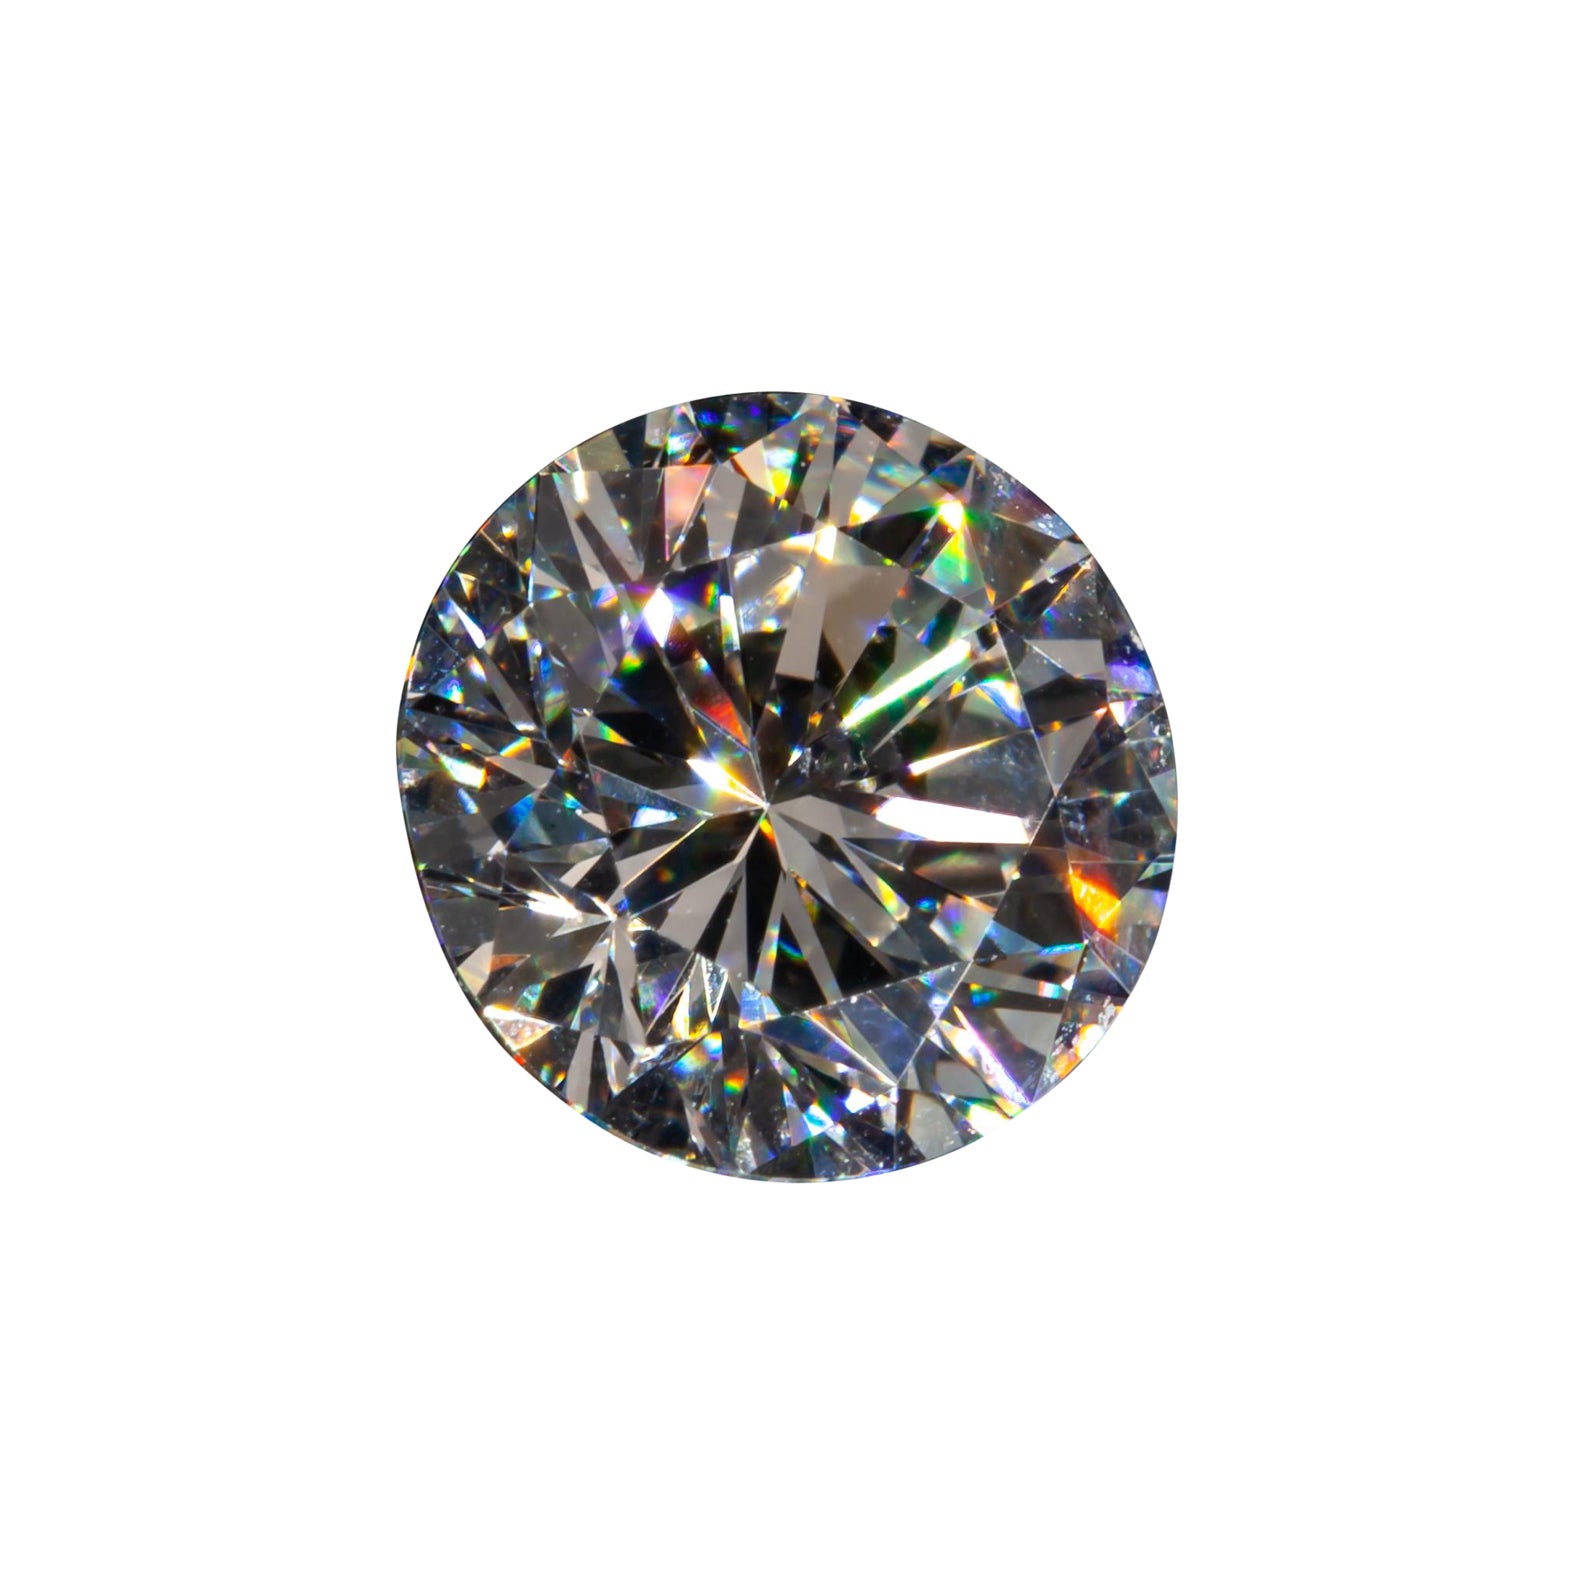 1.14 Carat Loose H/ SI1 Round Brilliant Cut Diamond Gia Certified For Sale